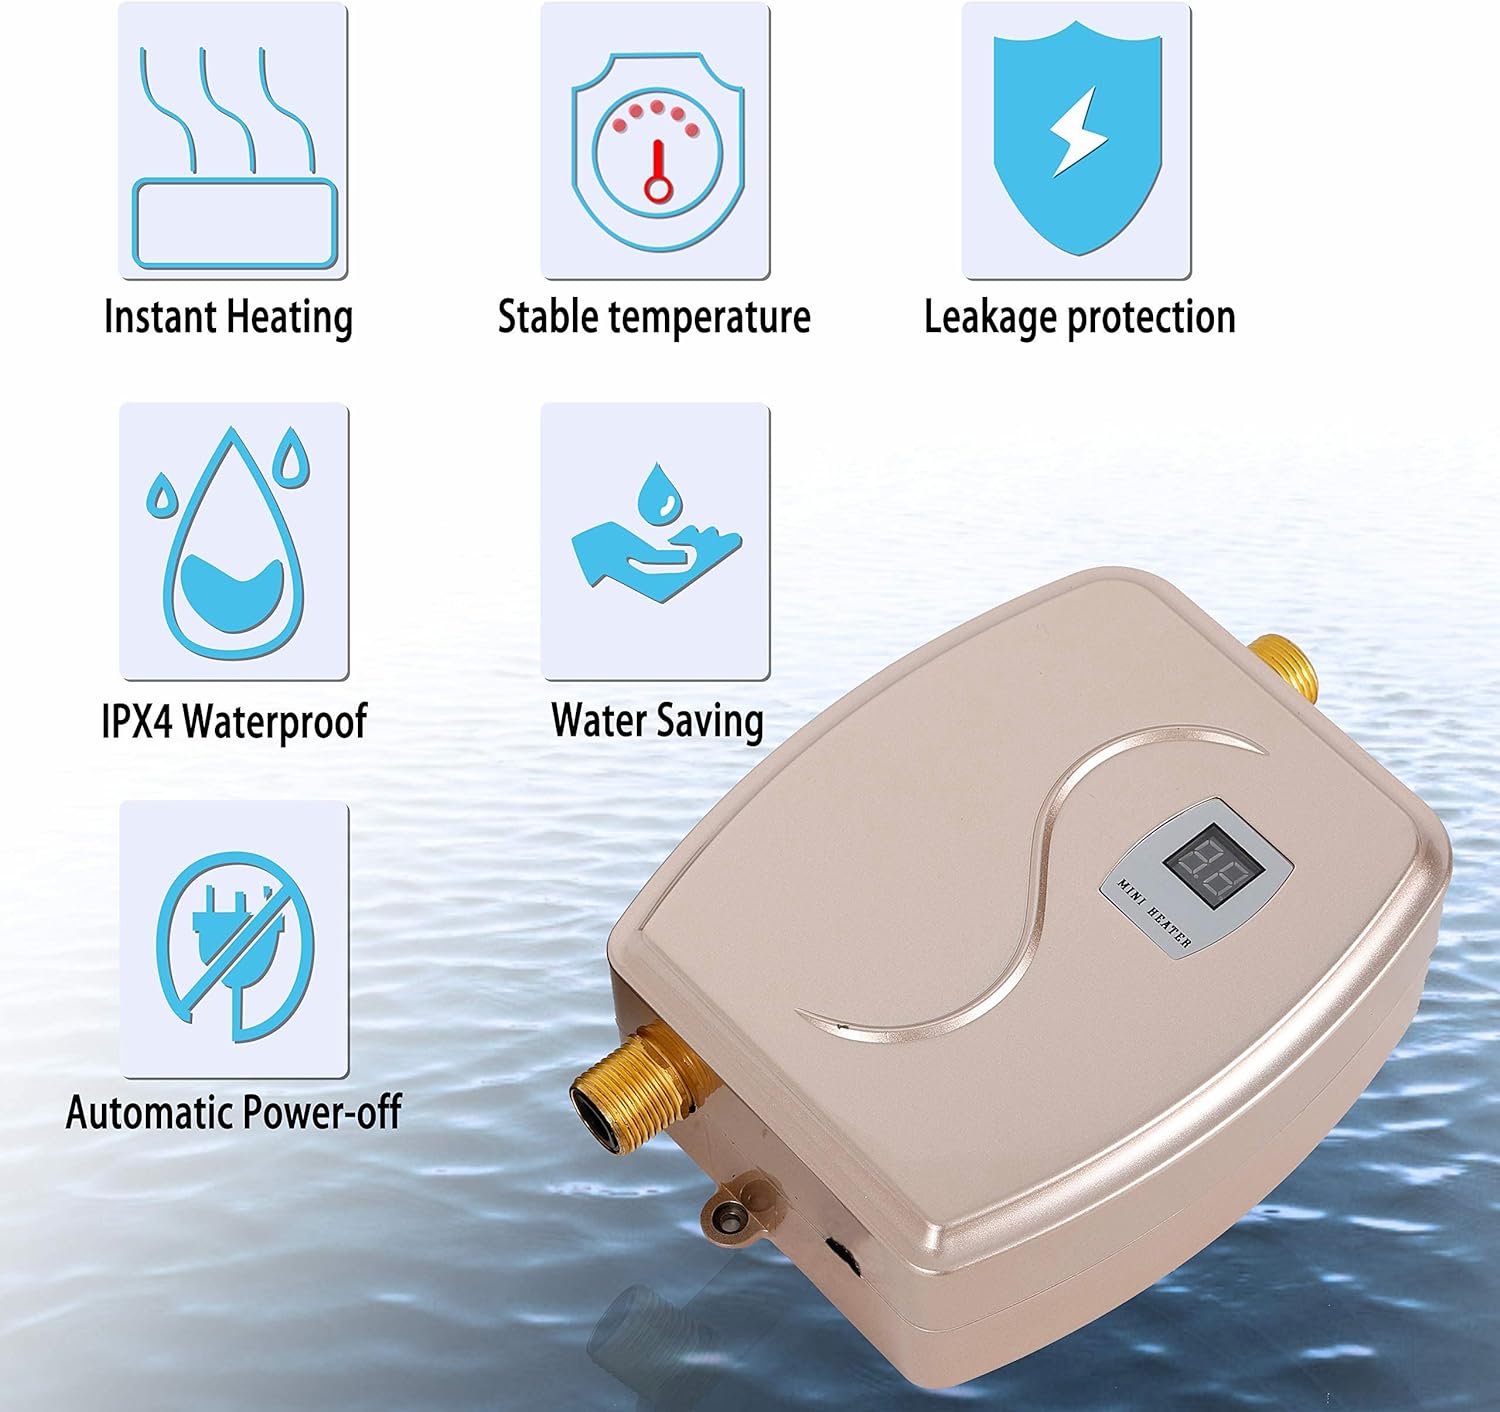 SHIOUCY Mini Electric Tankless Water Heater - 110V Small Instant Hot Water Heater,Under Sink Plug in Water Heaters on Demand with LCD D